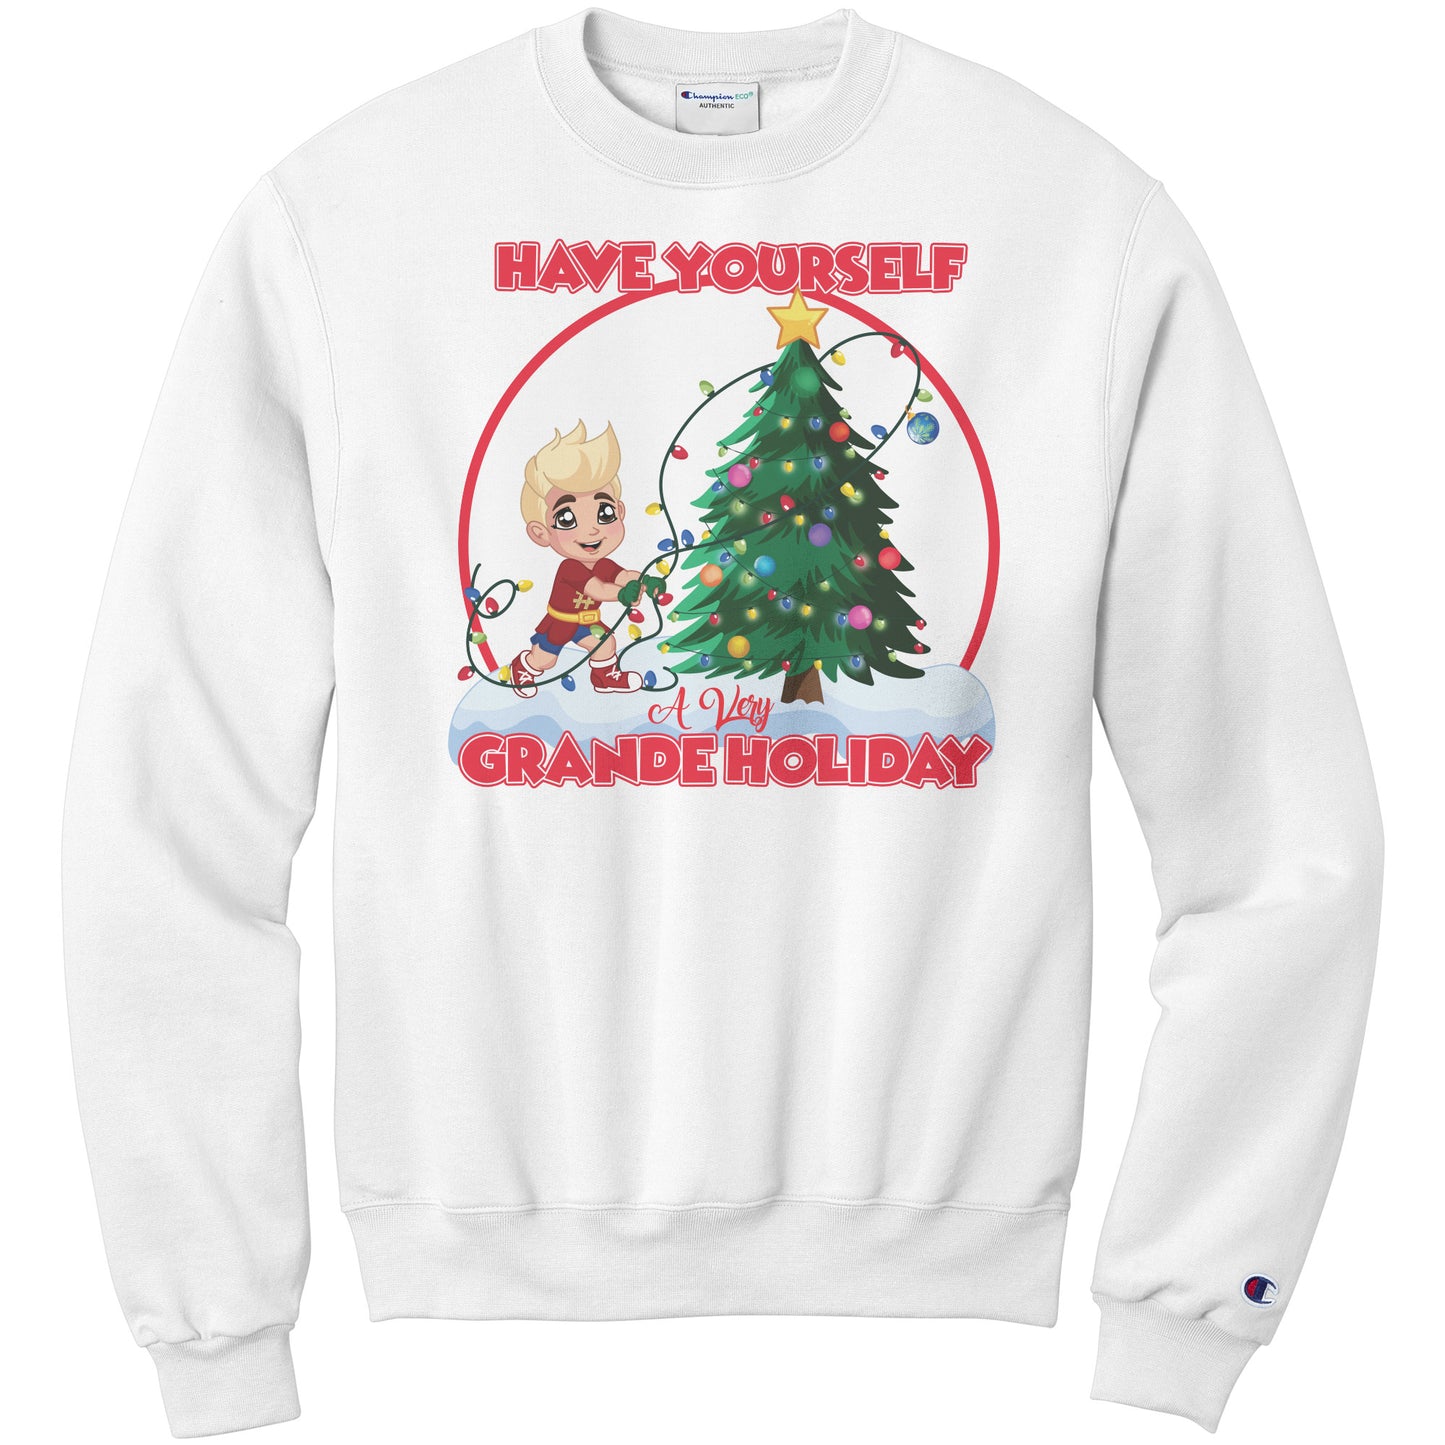 Have Yourself A Very Grande Holiday Champion Sweatshirt